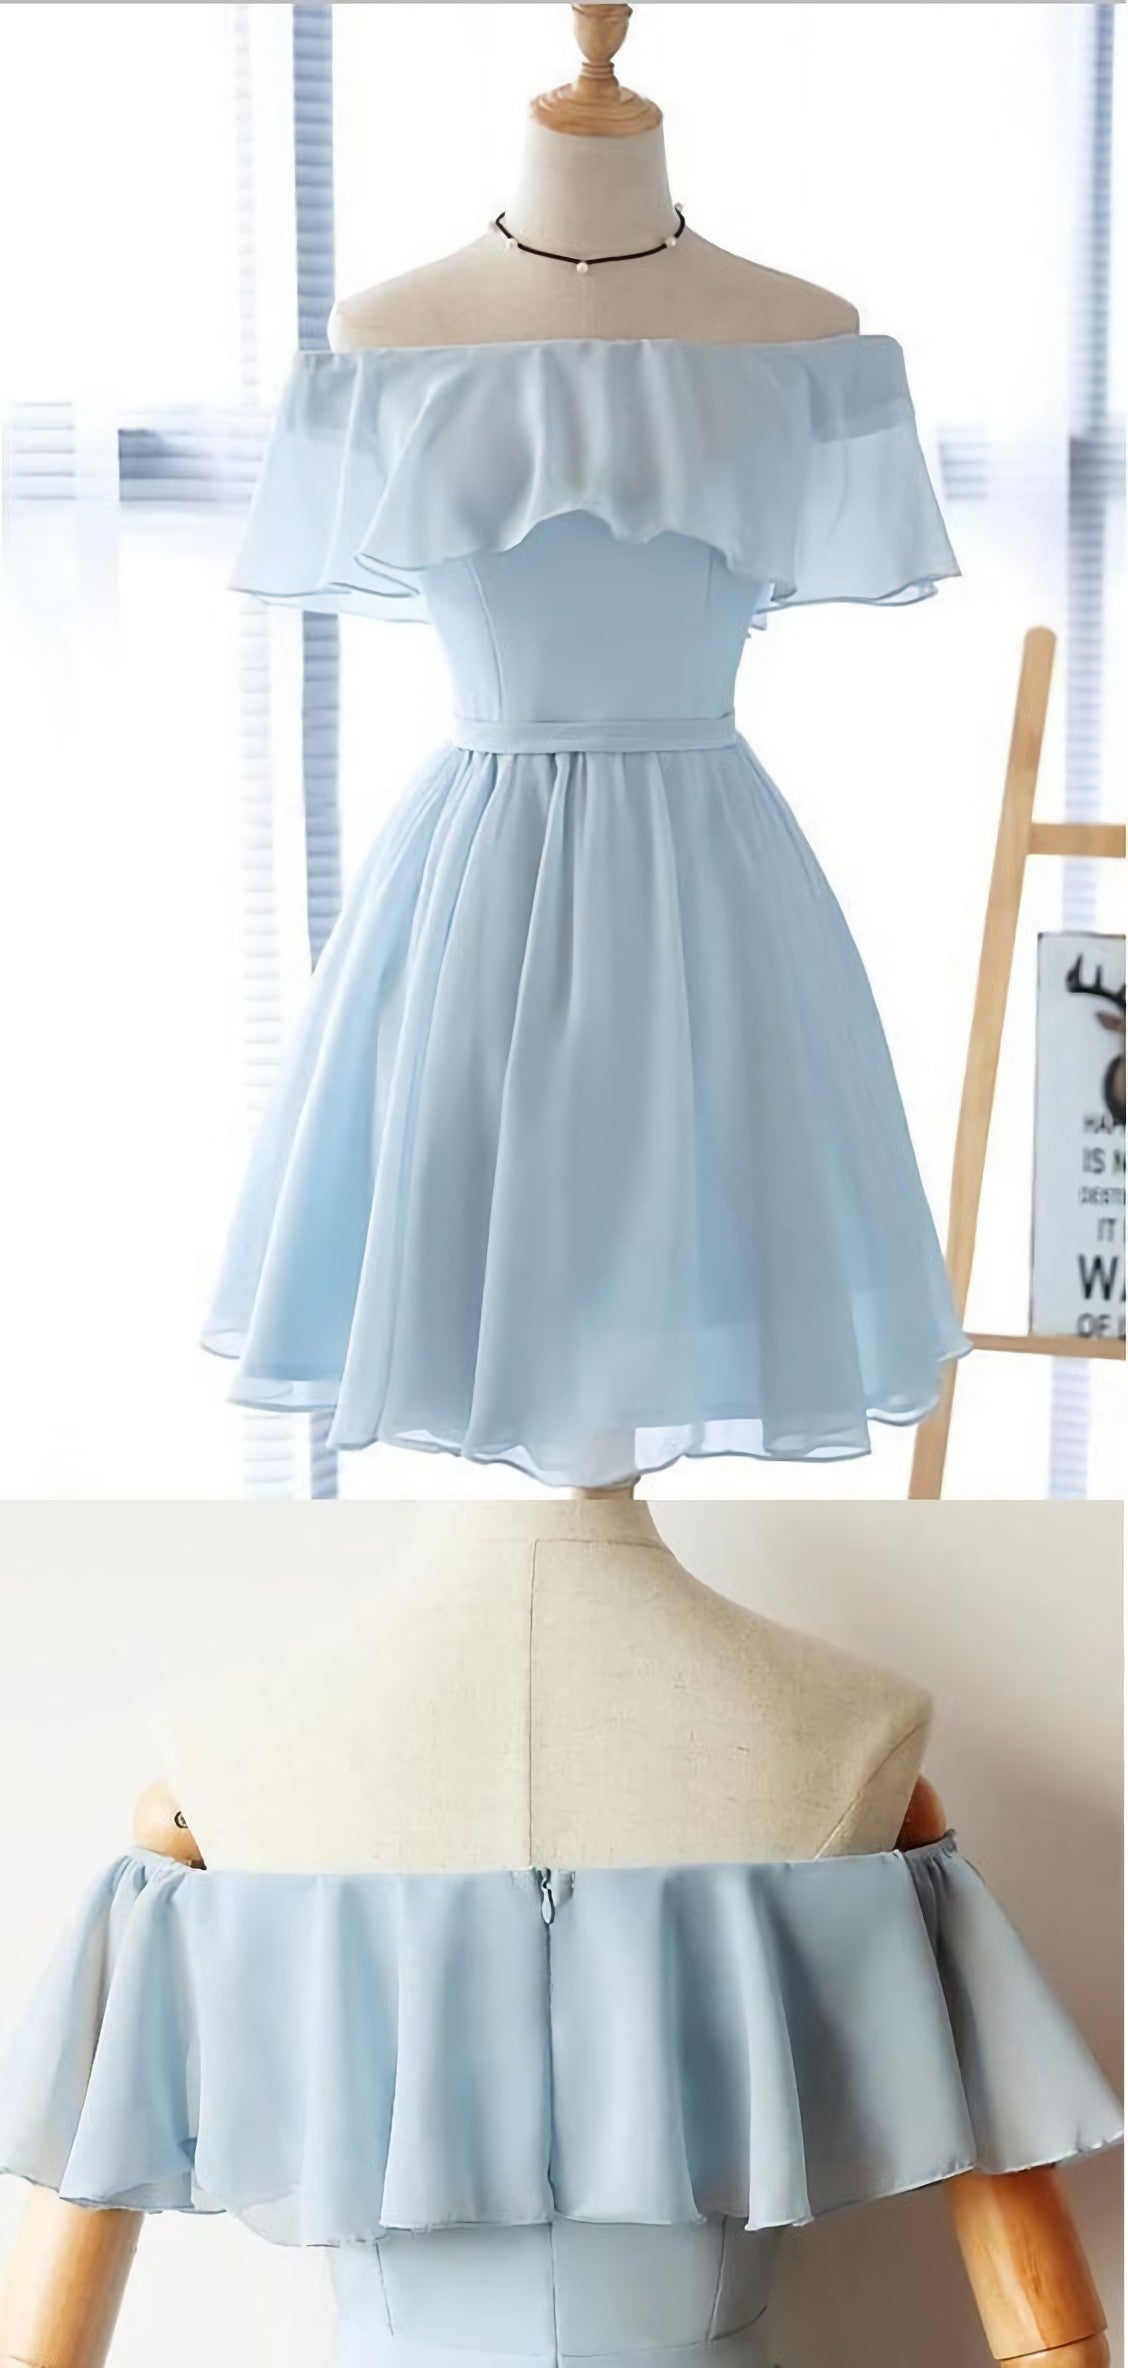 Simple Off The Shoulder Light Blue Chiffon A Line Short Corset Homecoming Dress outfit, Prom Dress Sweetheart